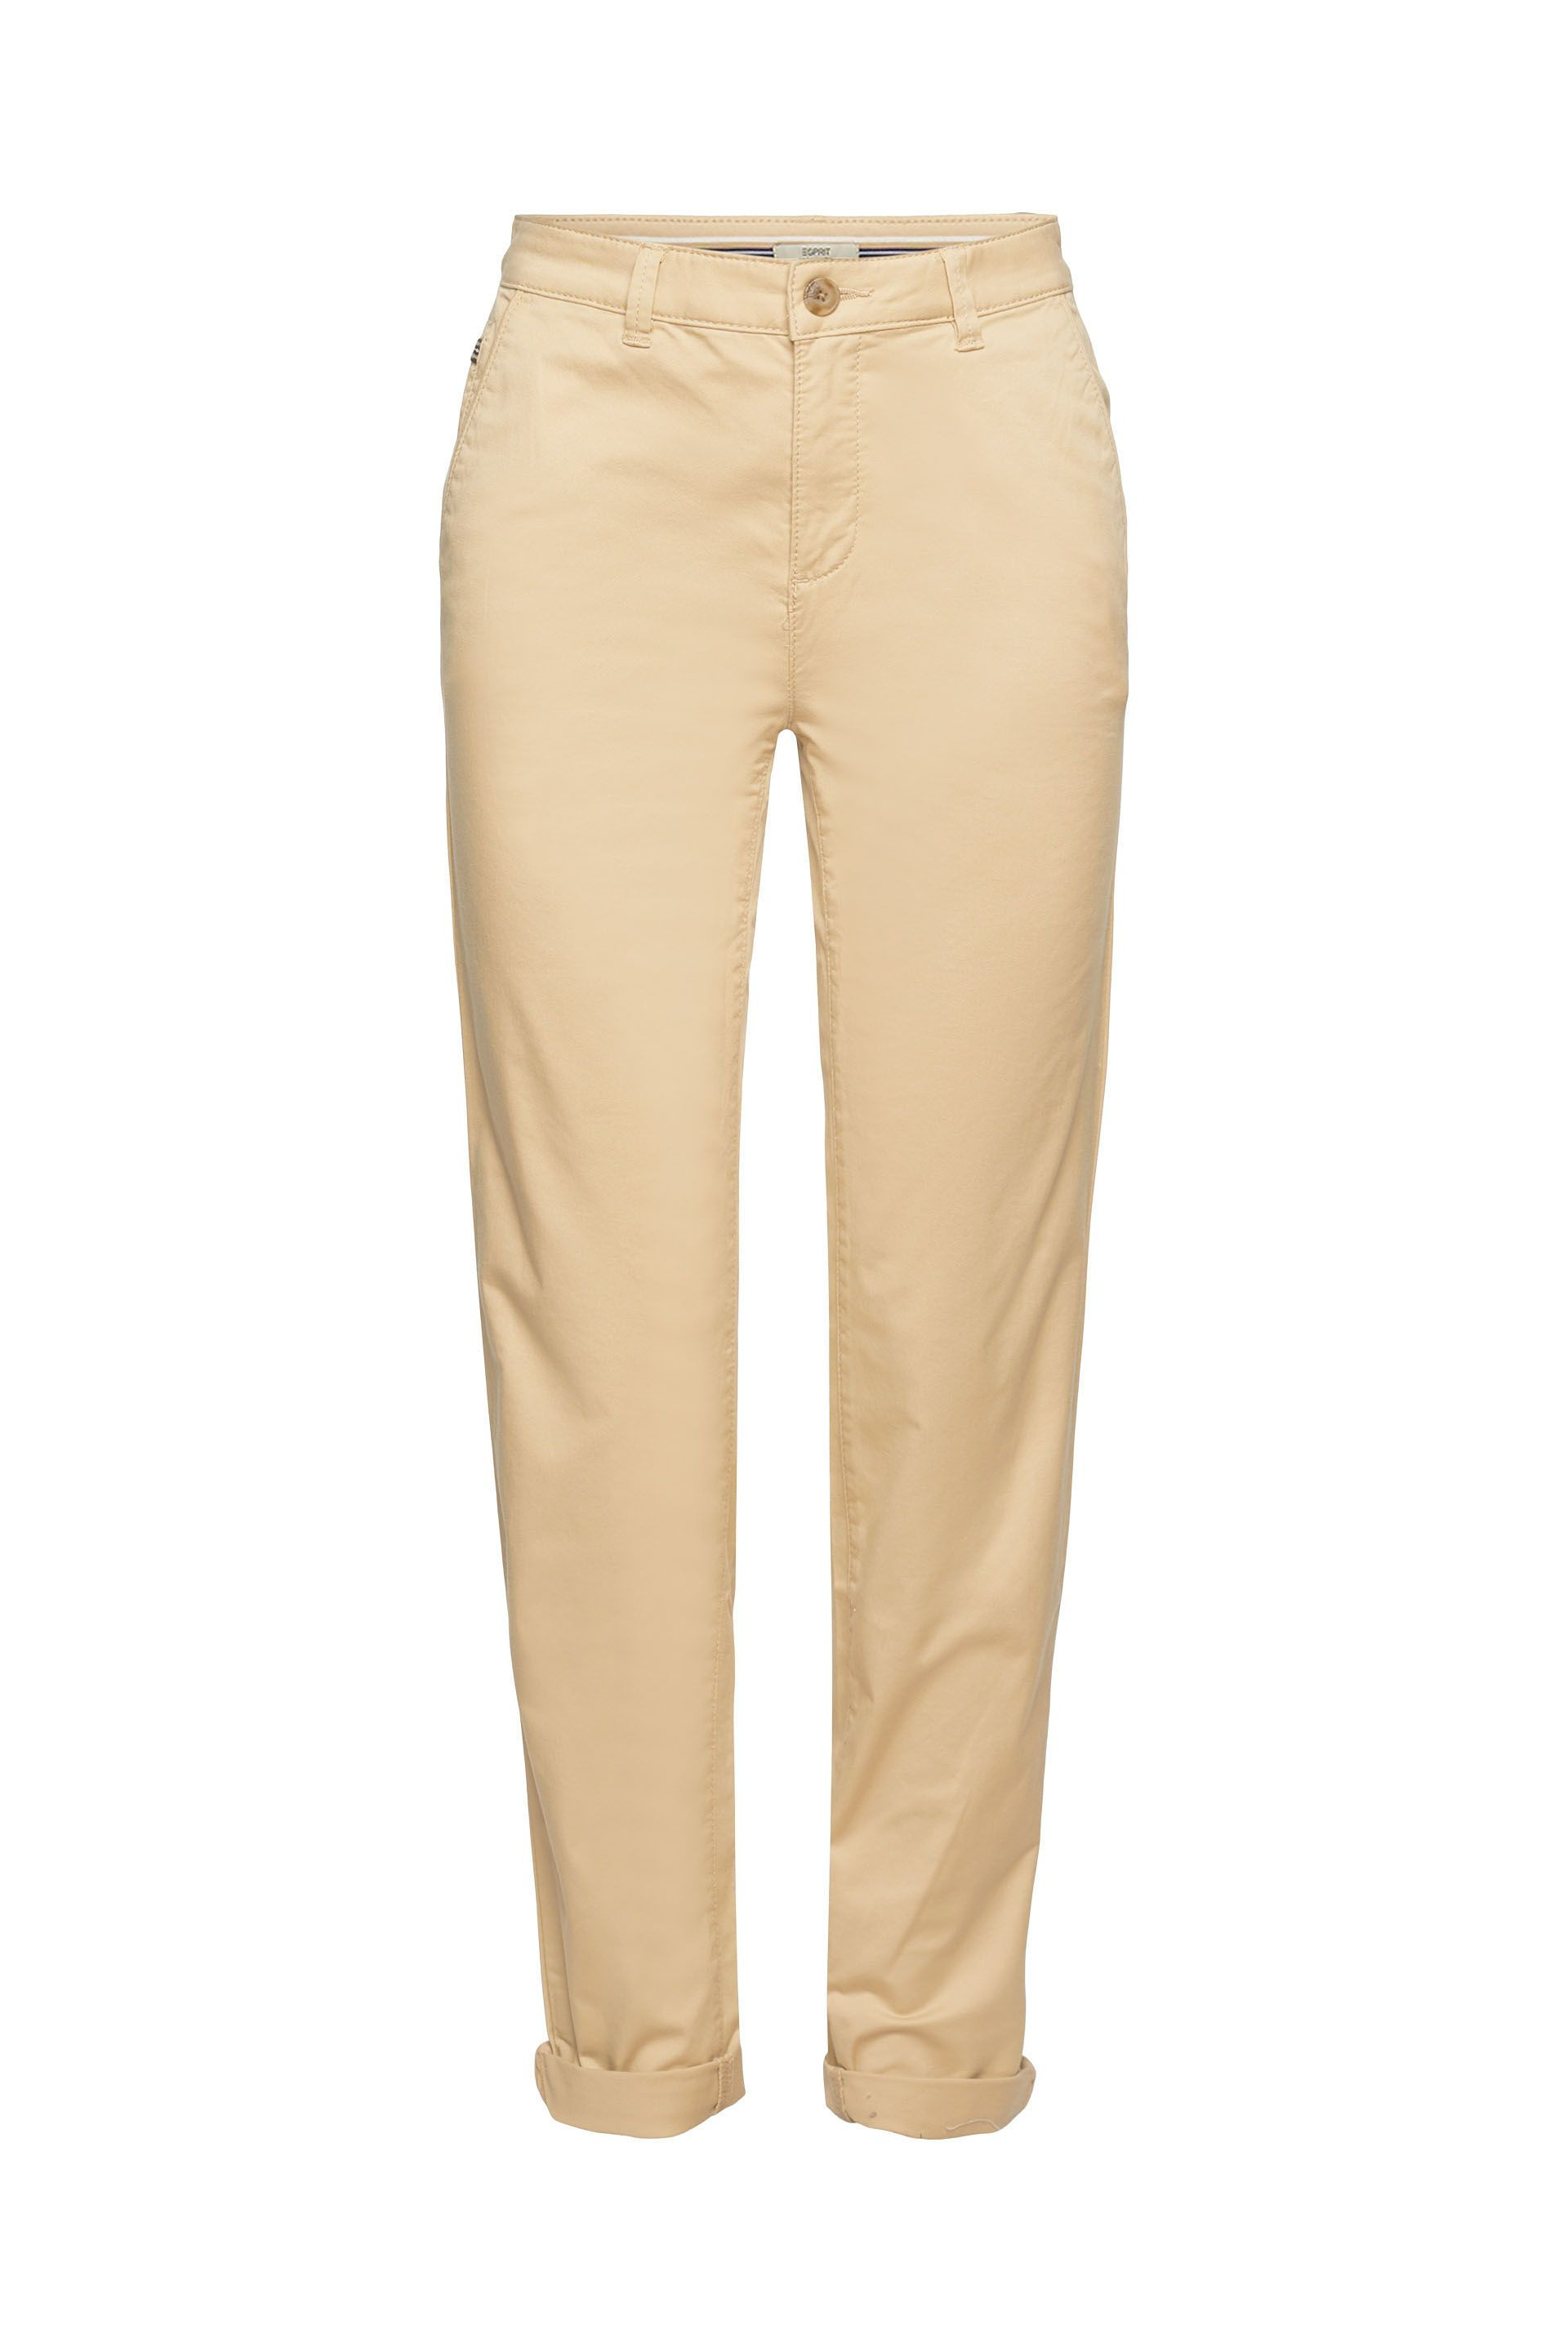 Stretch chino trousers, Beige, large image number 0